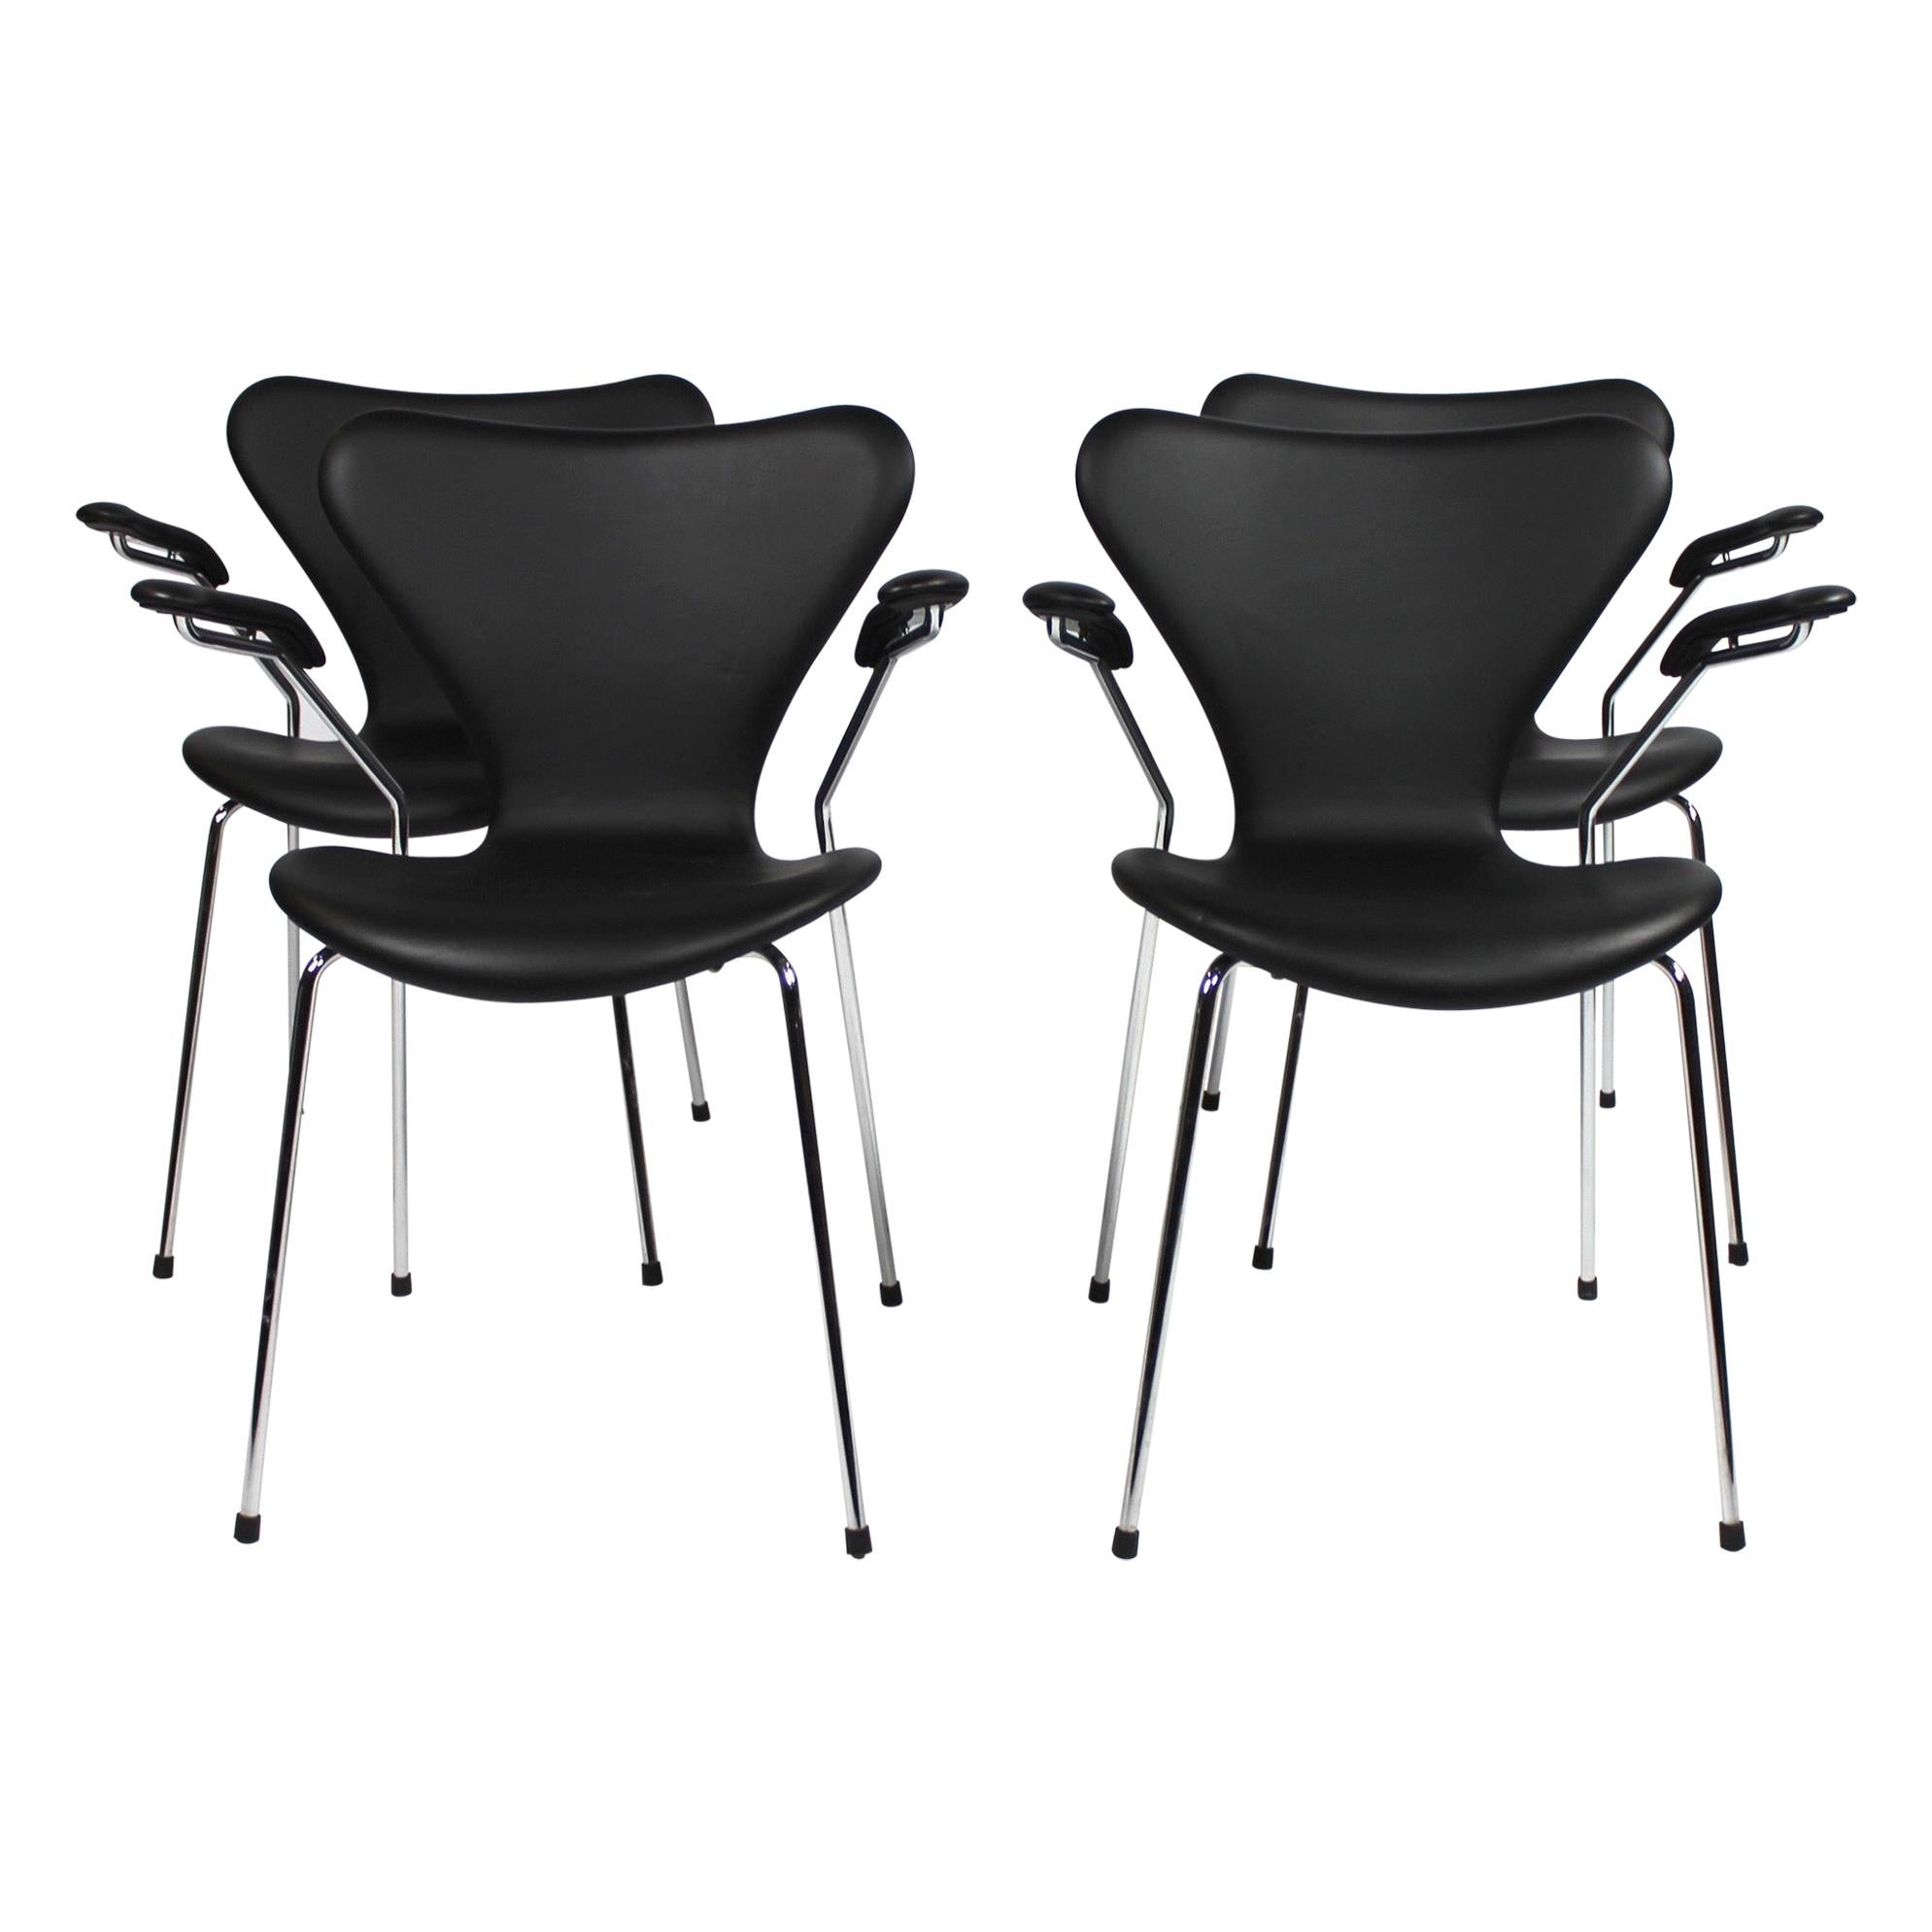 Set of Four Series 7 chairs, Model 3207, with Armrests by Arne Jacobsen, 2016